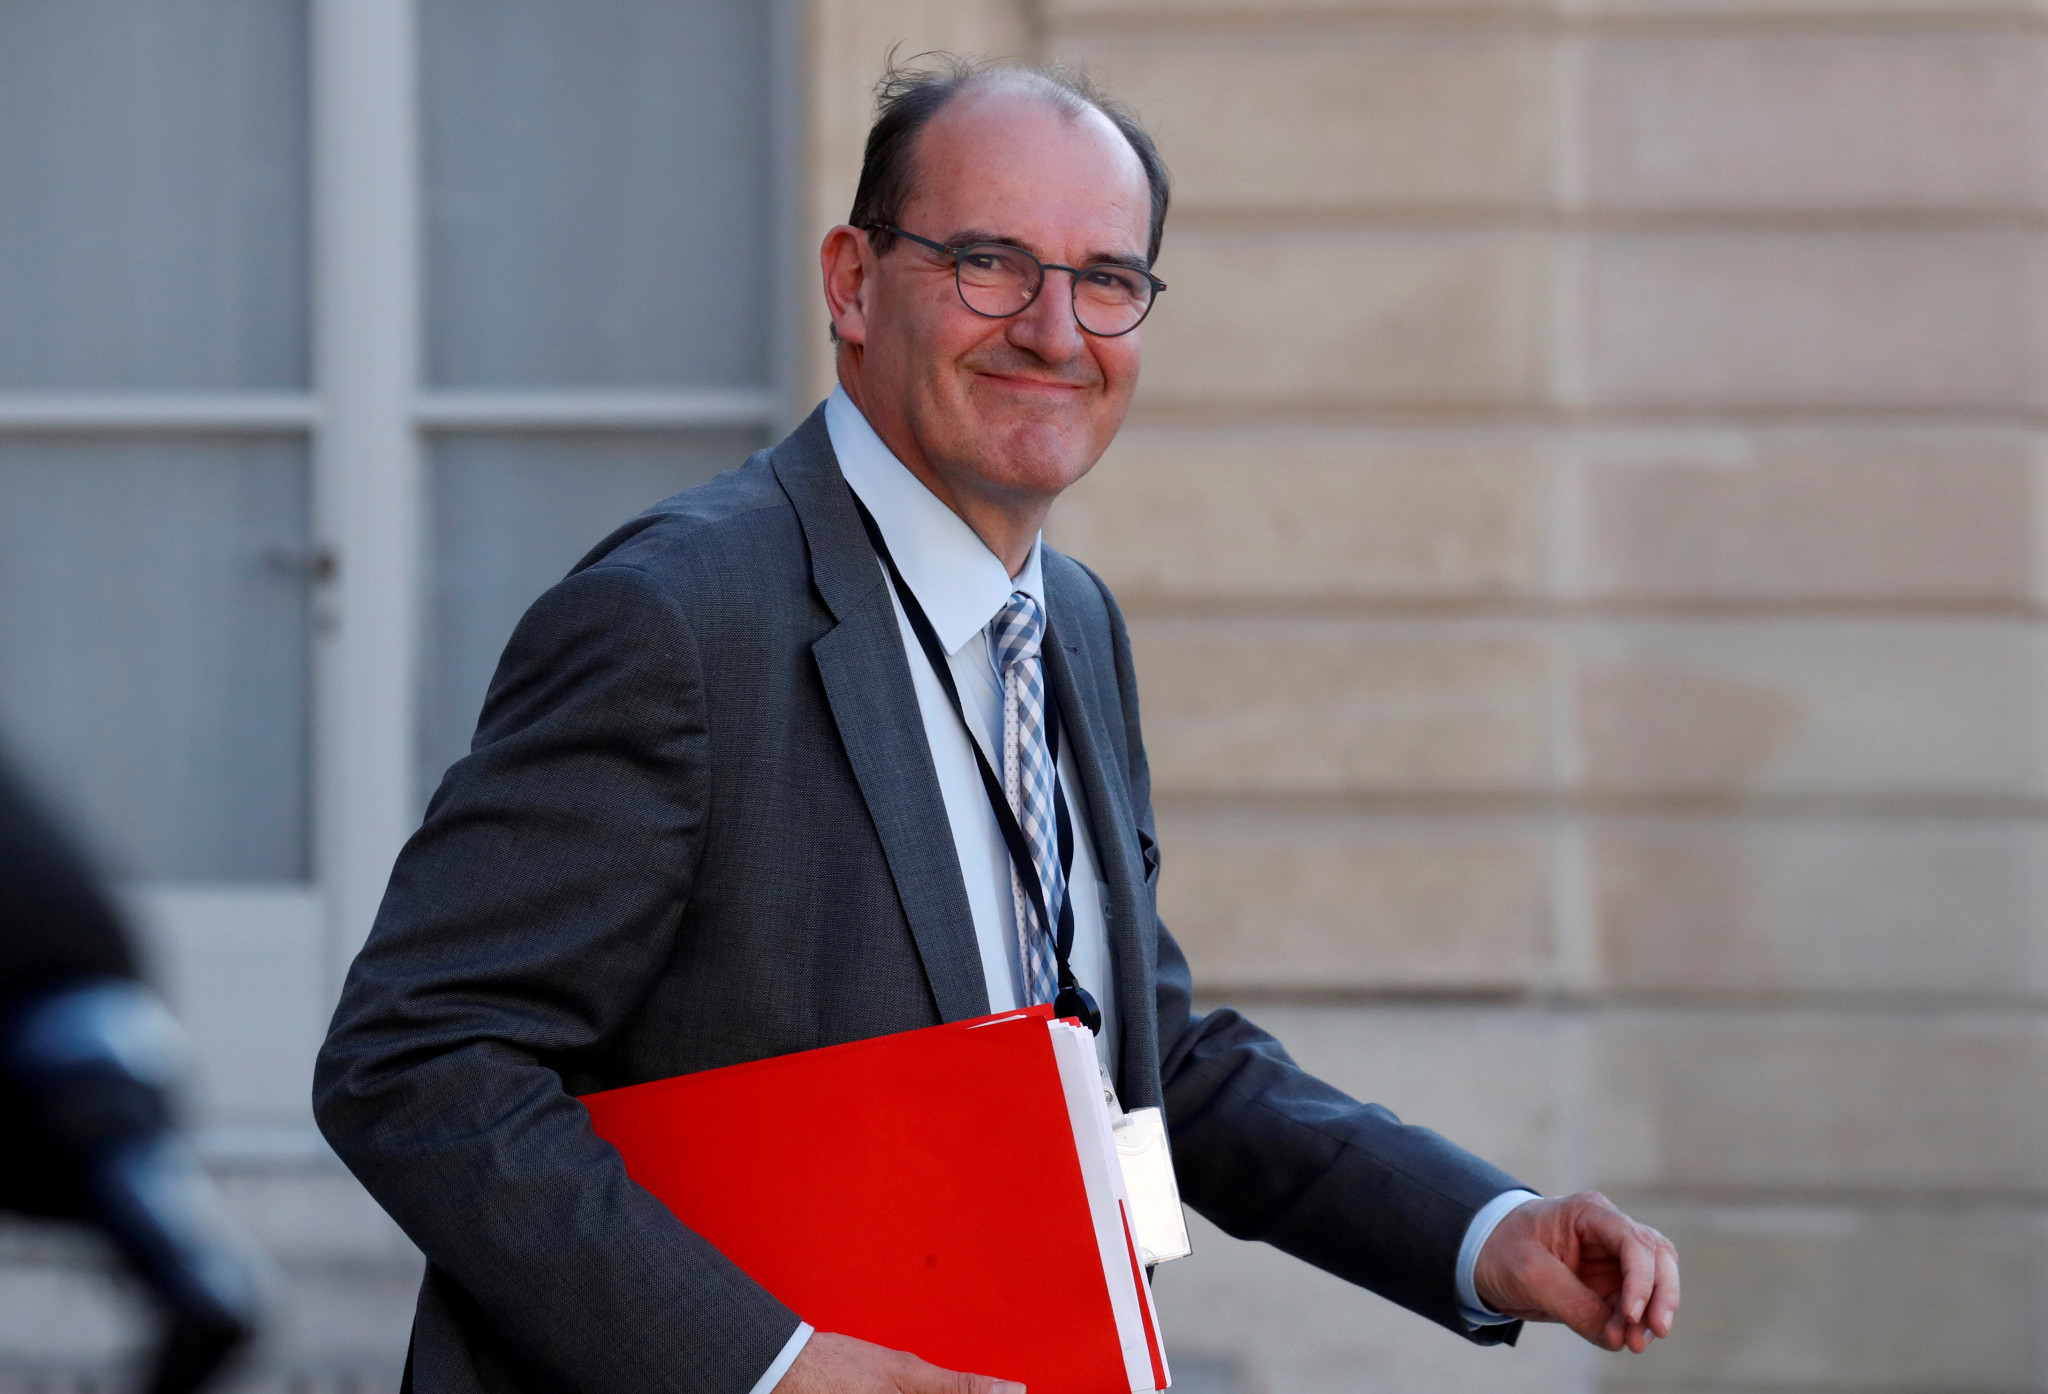 Castex returns to Paris 2024 interministerial role as France exits lockdown